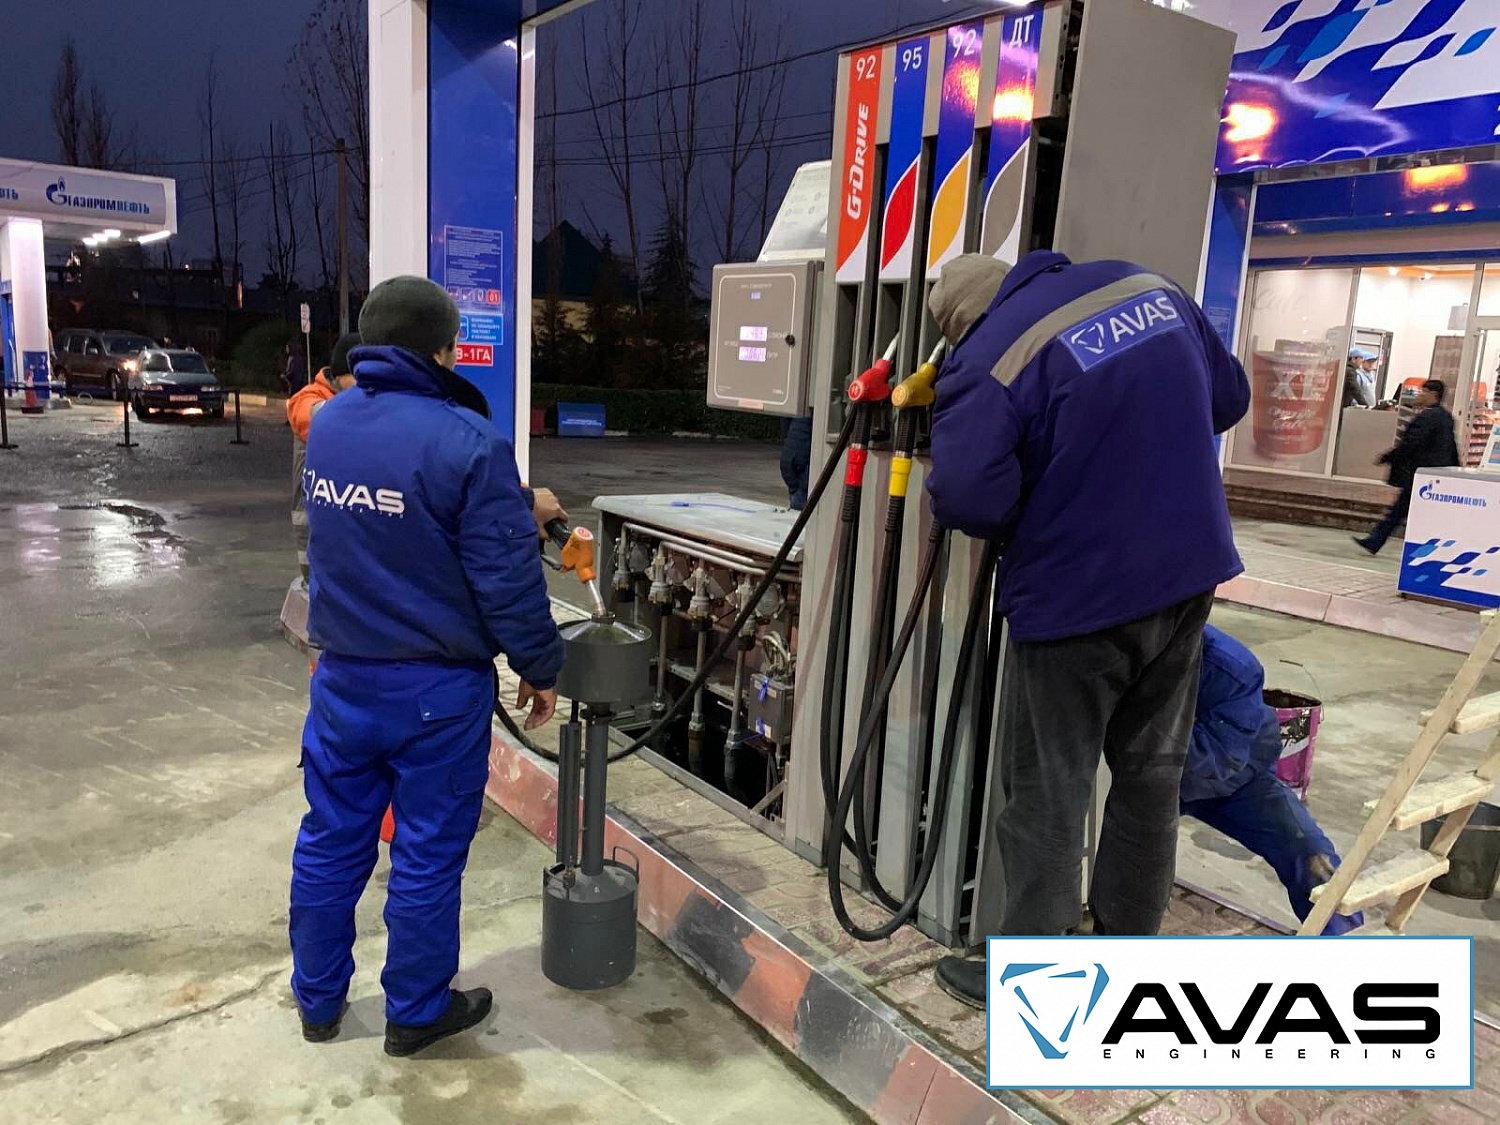 Updating the fuel dispenser of one of the gas station networks of GAZPROM NEFT-TAJIKISTAN LLC